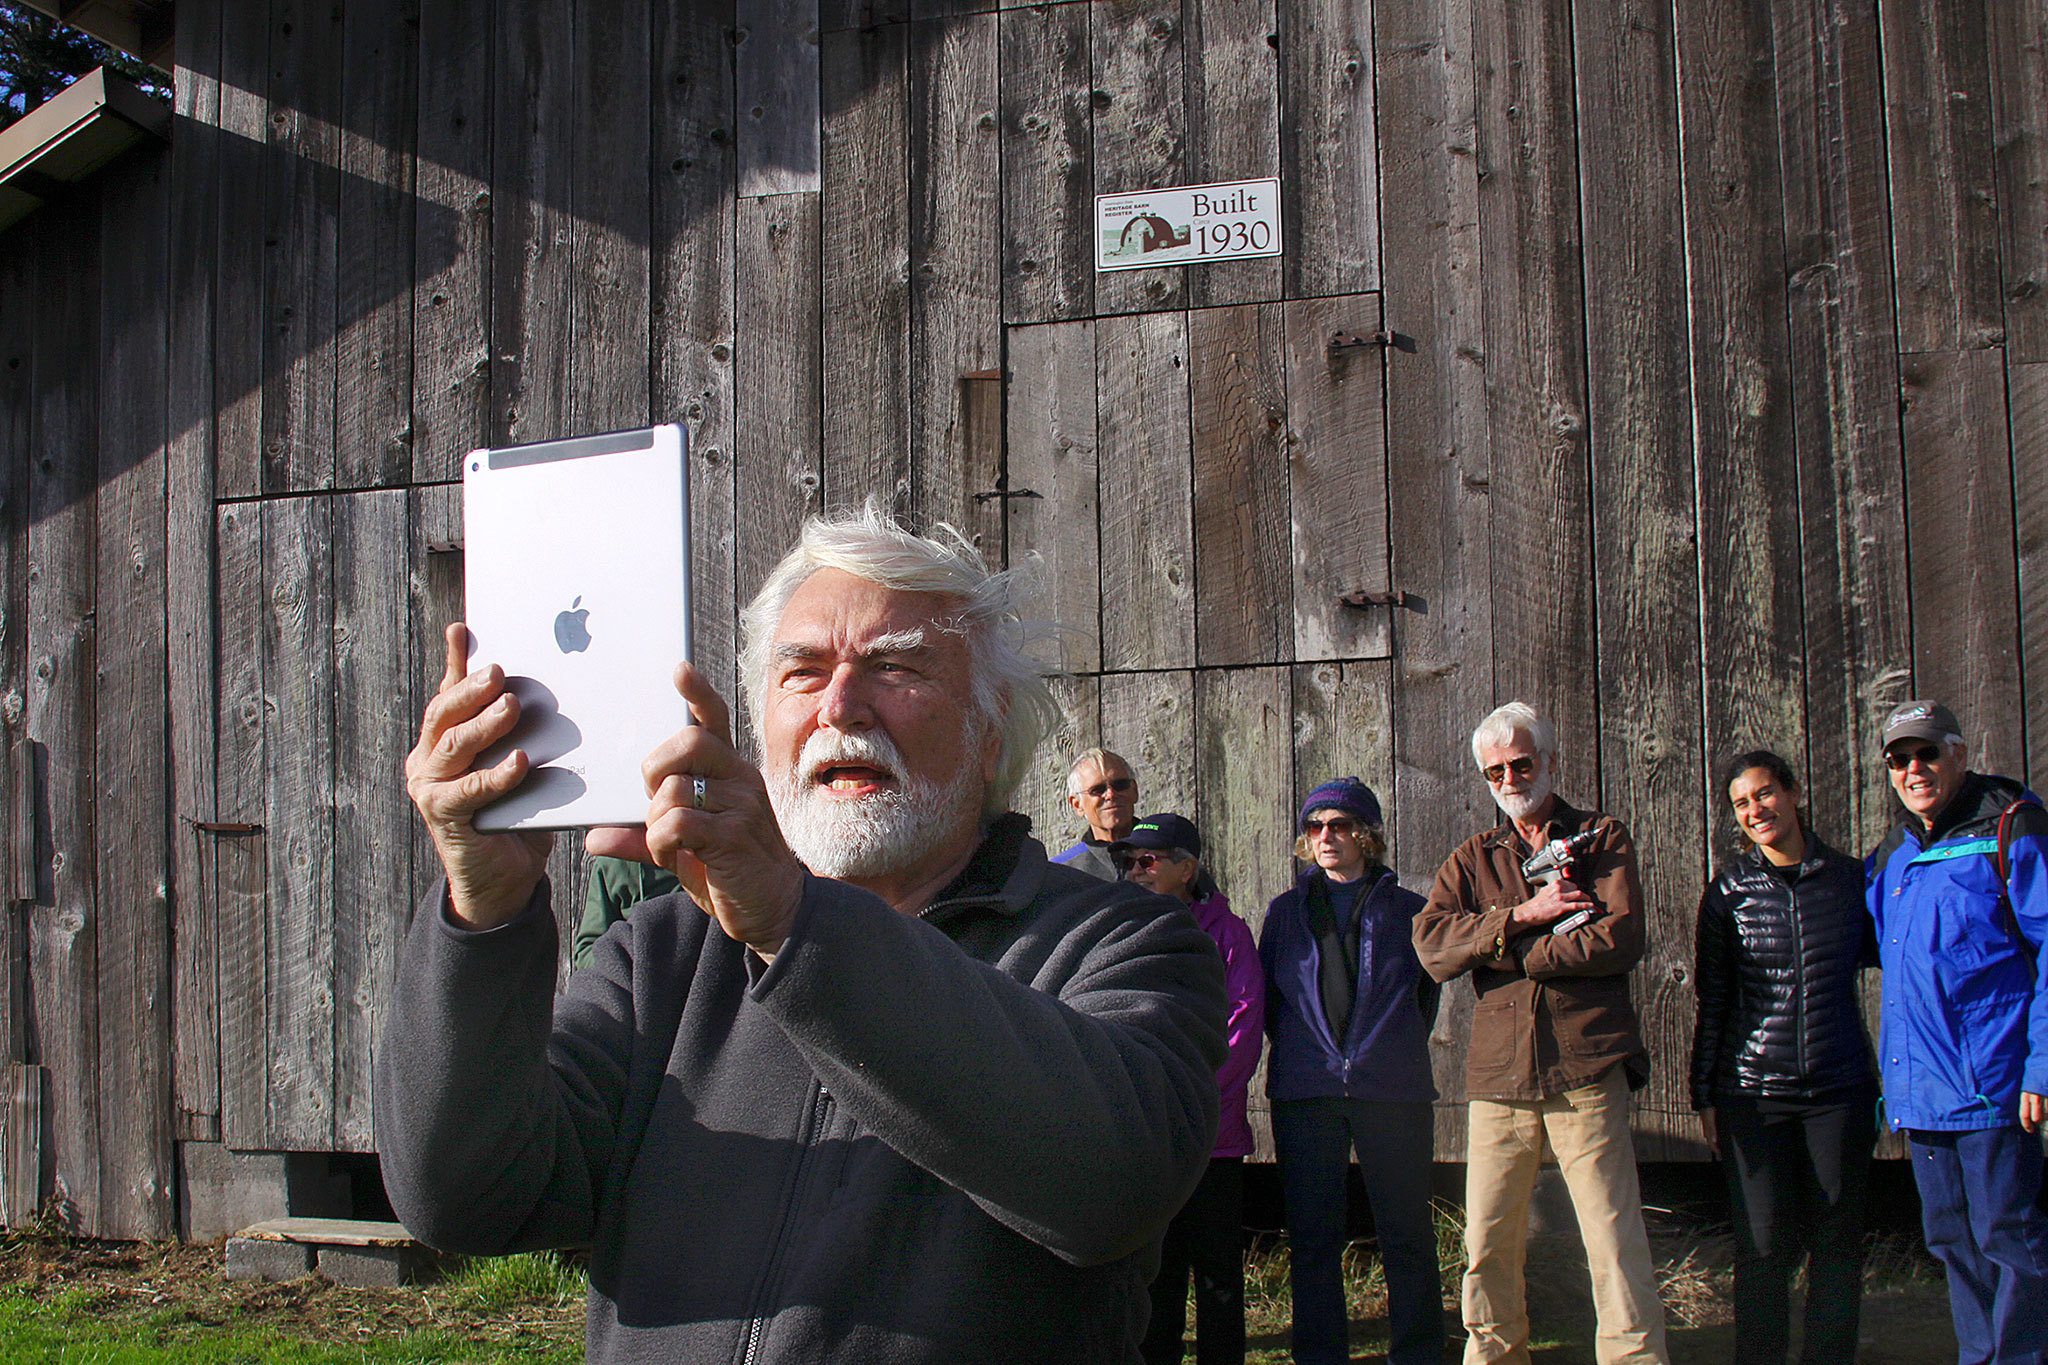 Harrison Goodall, front, takes a group photo in front of the Pratt Sheep Barn, which has been added to Washington’sHeritage Barn Register. The barn, located near the bluff on Ebey’s Prairie, was restored by Goodall and a group ofvolunteers three years ago.